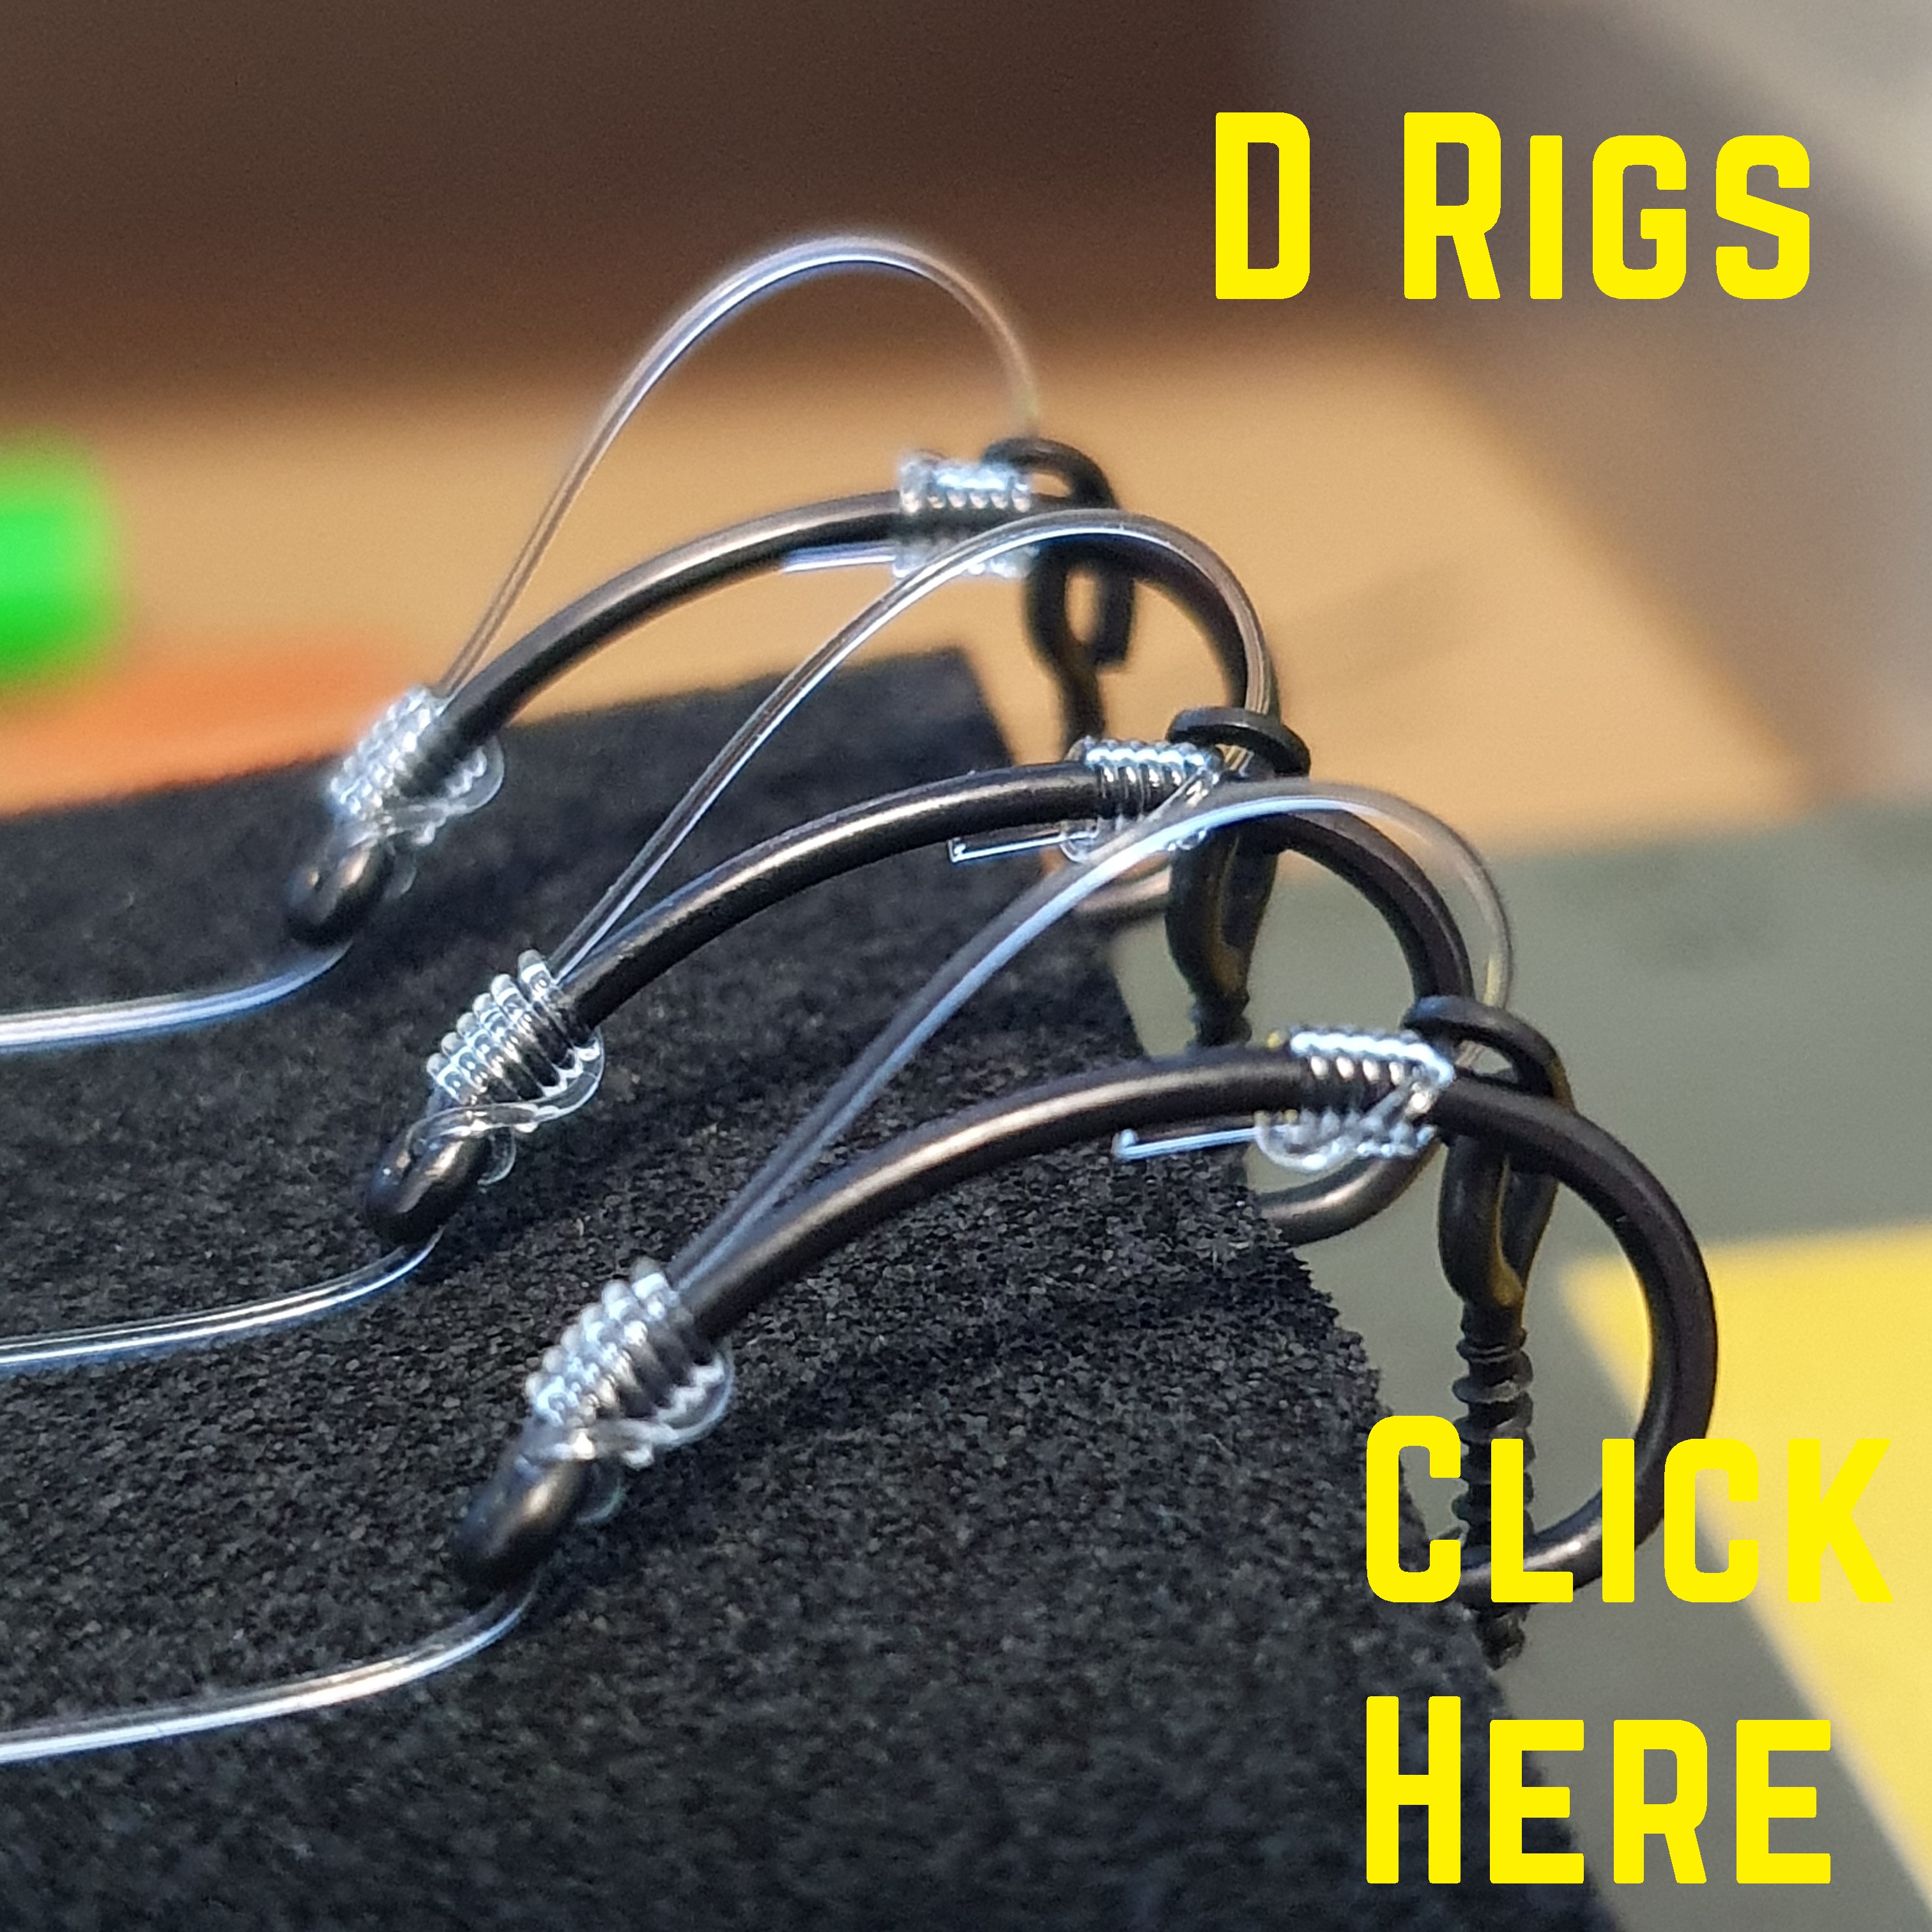 Please take a look at our other Fluorocarbon D Rig listings